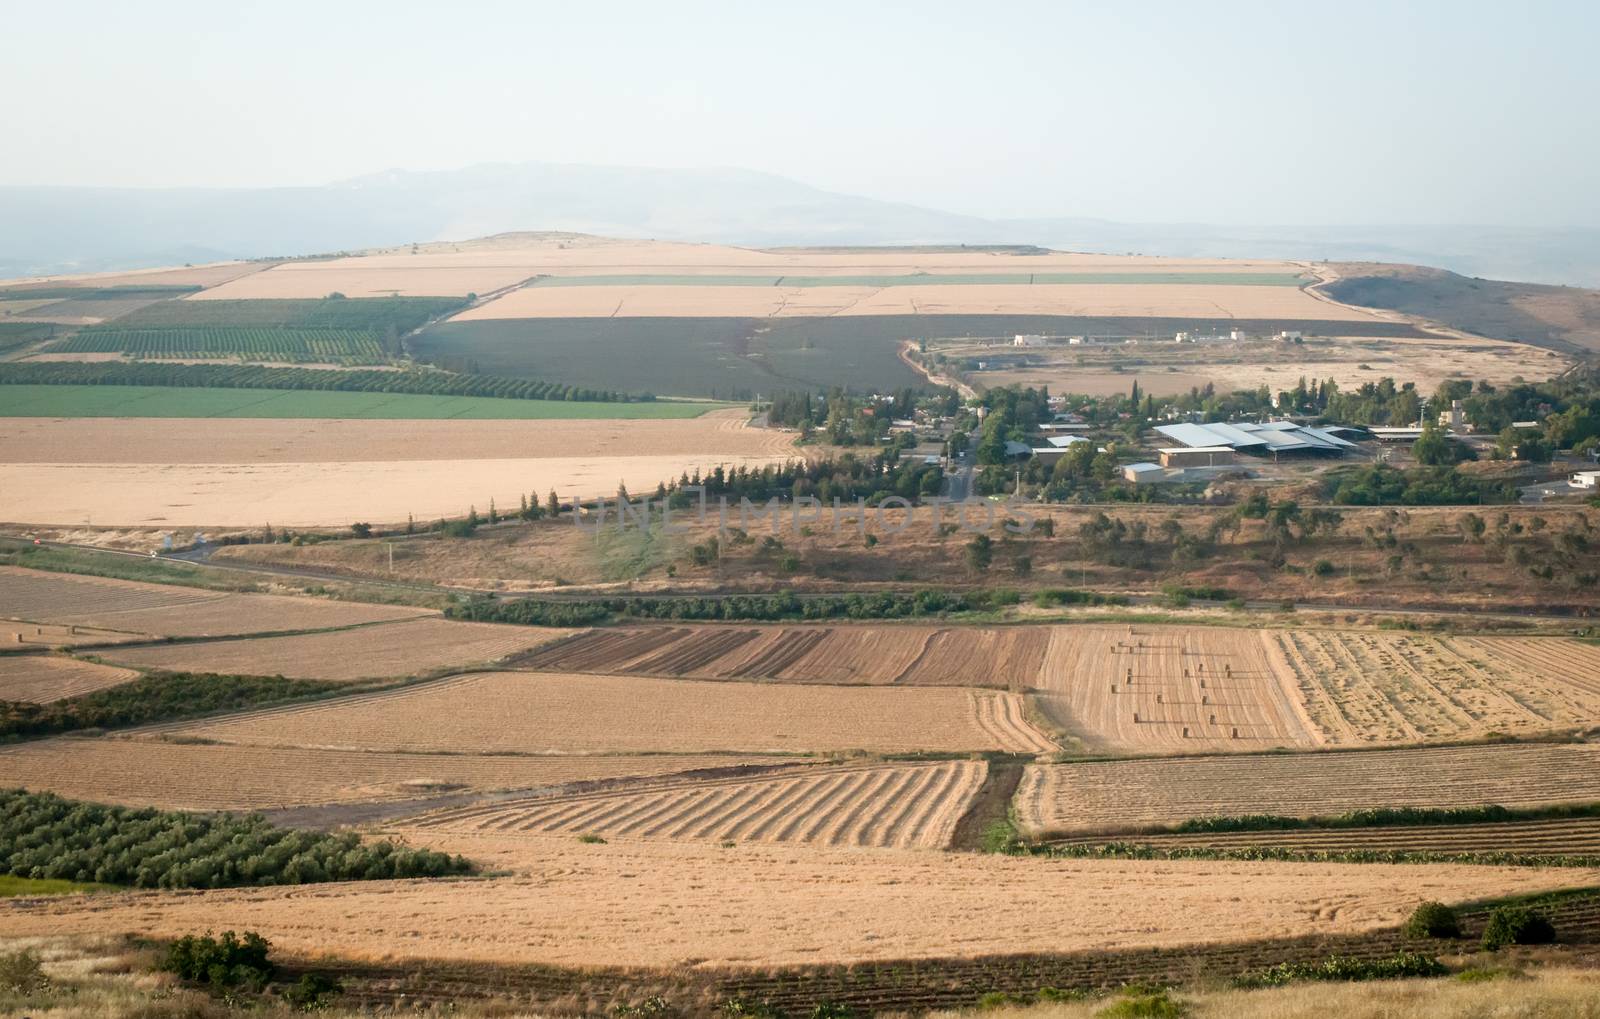 View of Galilee mountains, agriculture valley. North Israel.